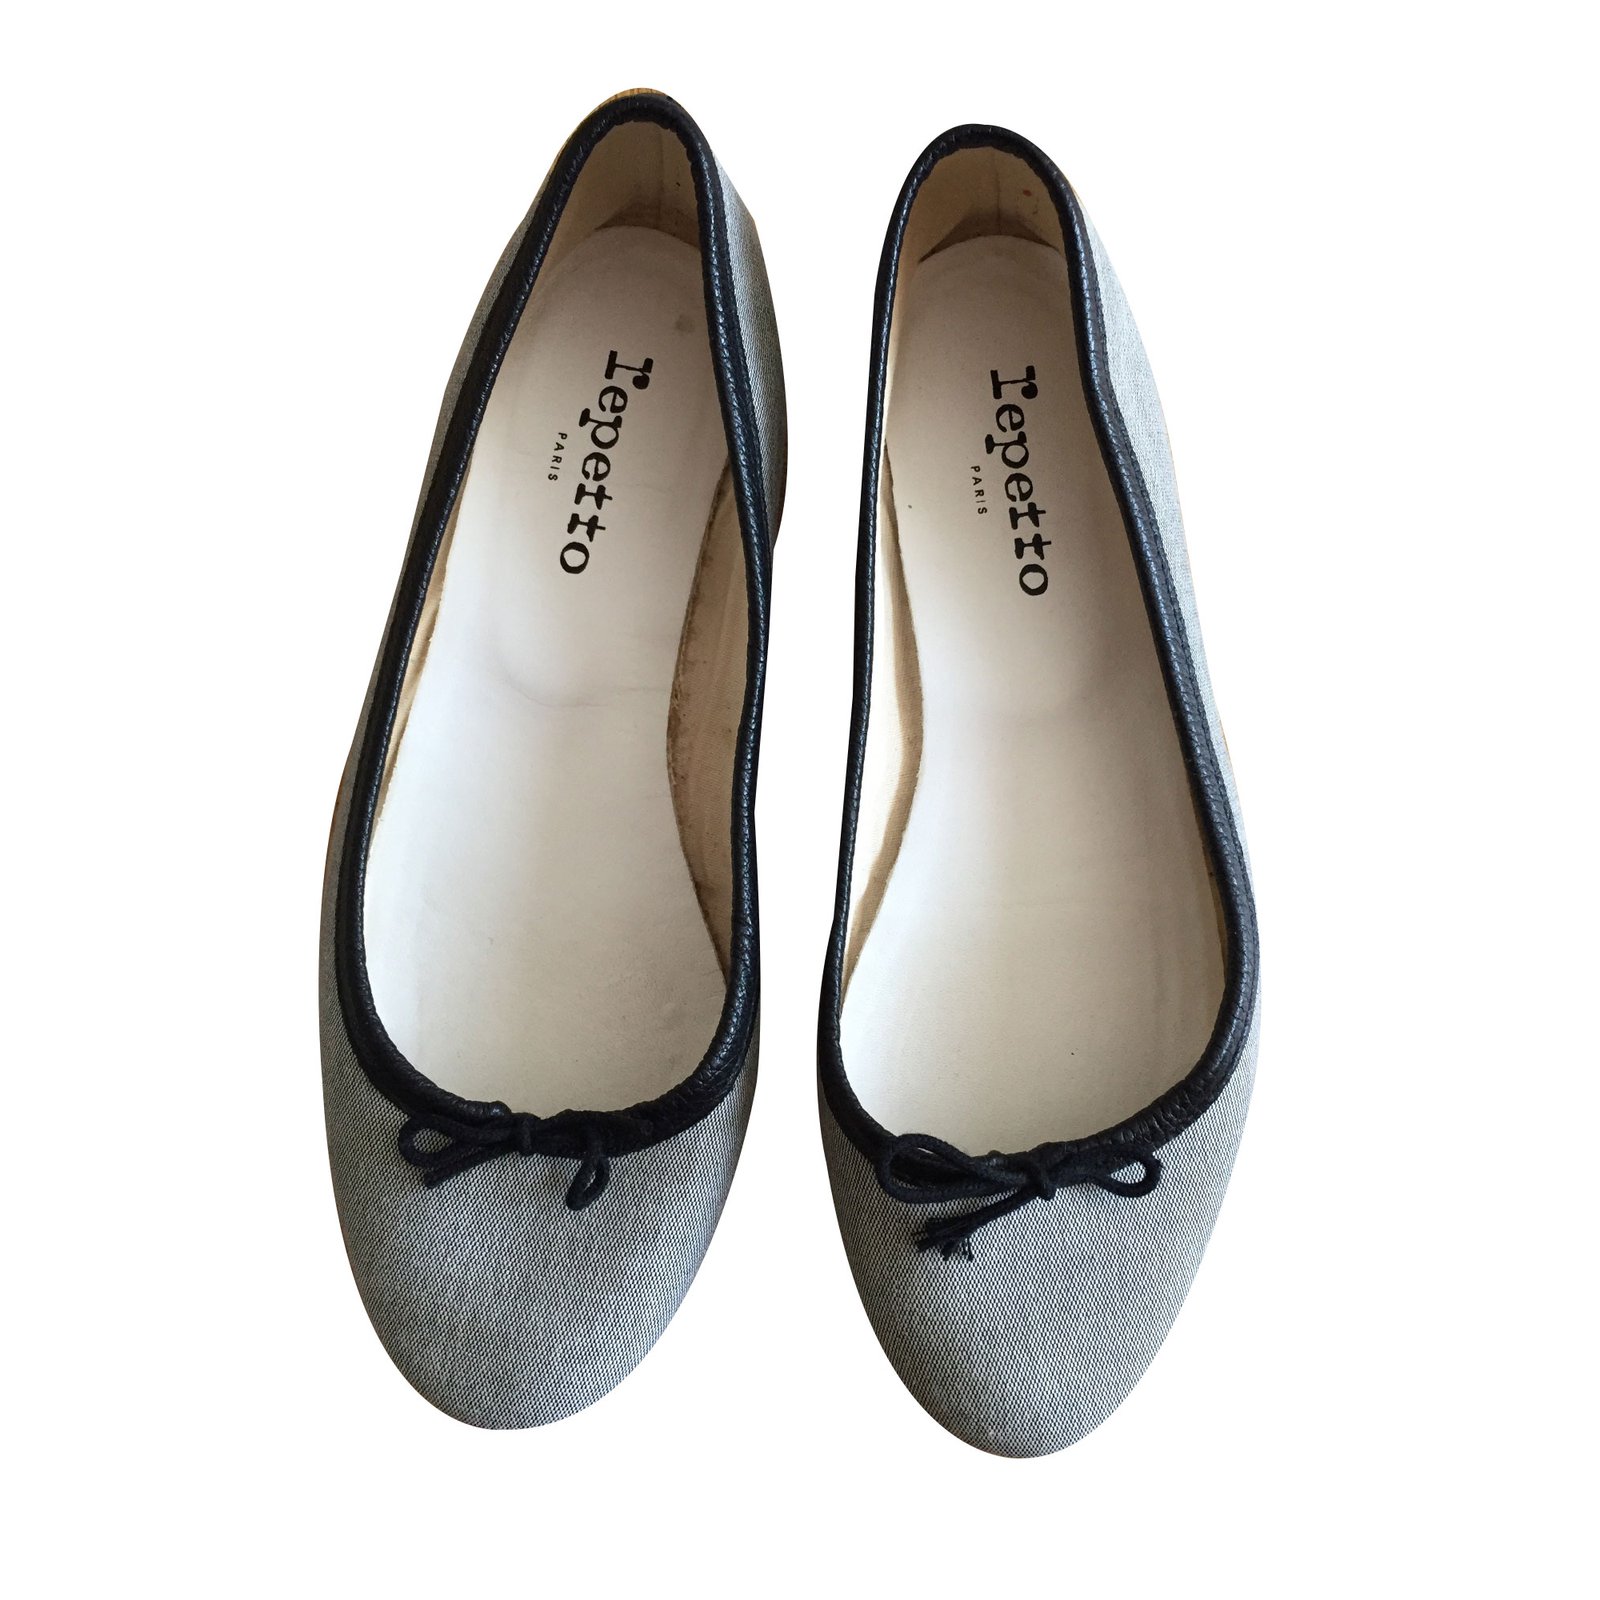 repetto pointed toe flats